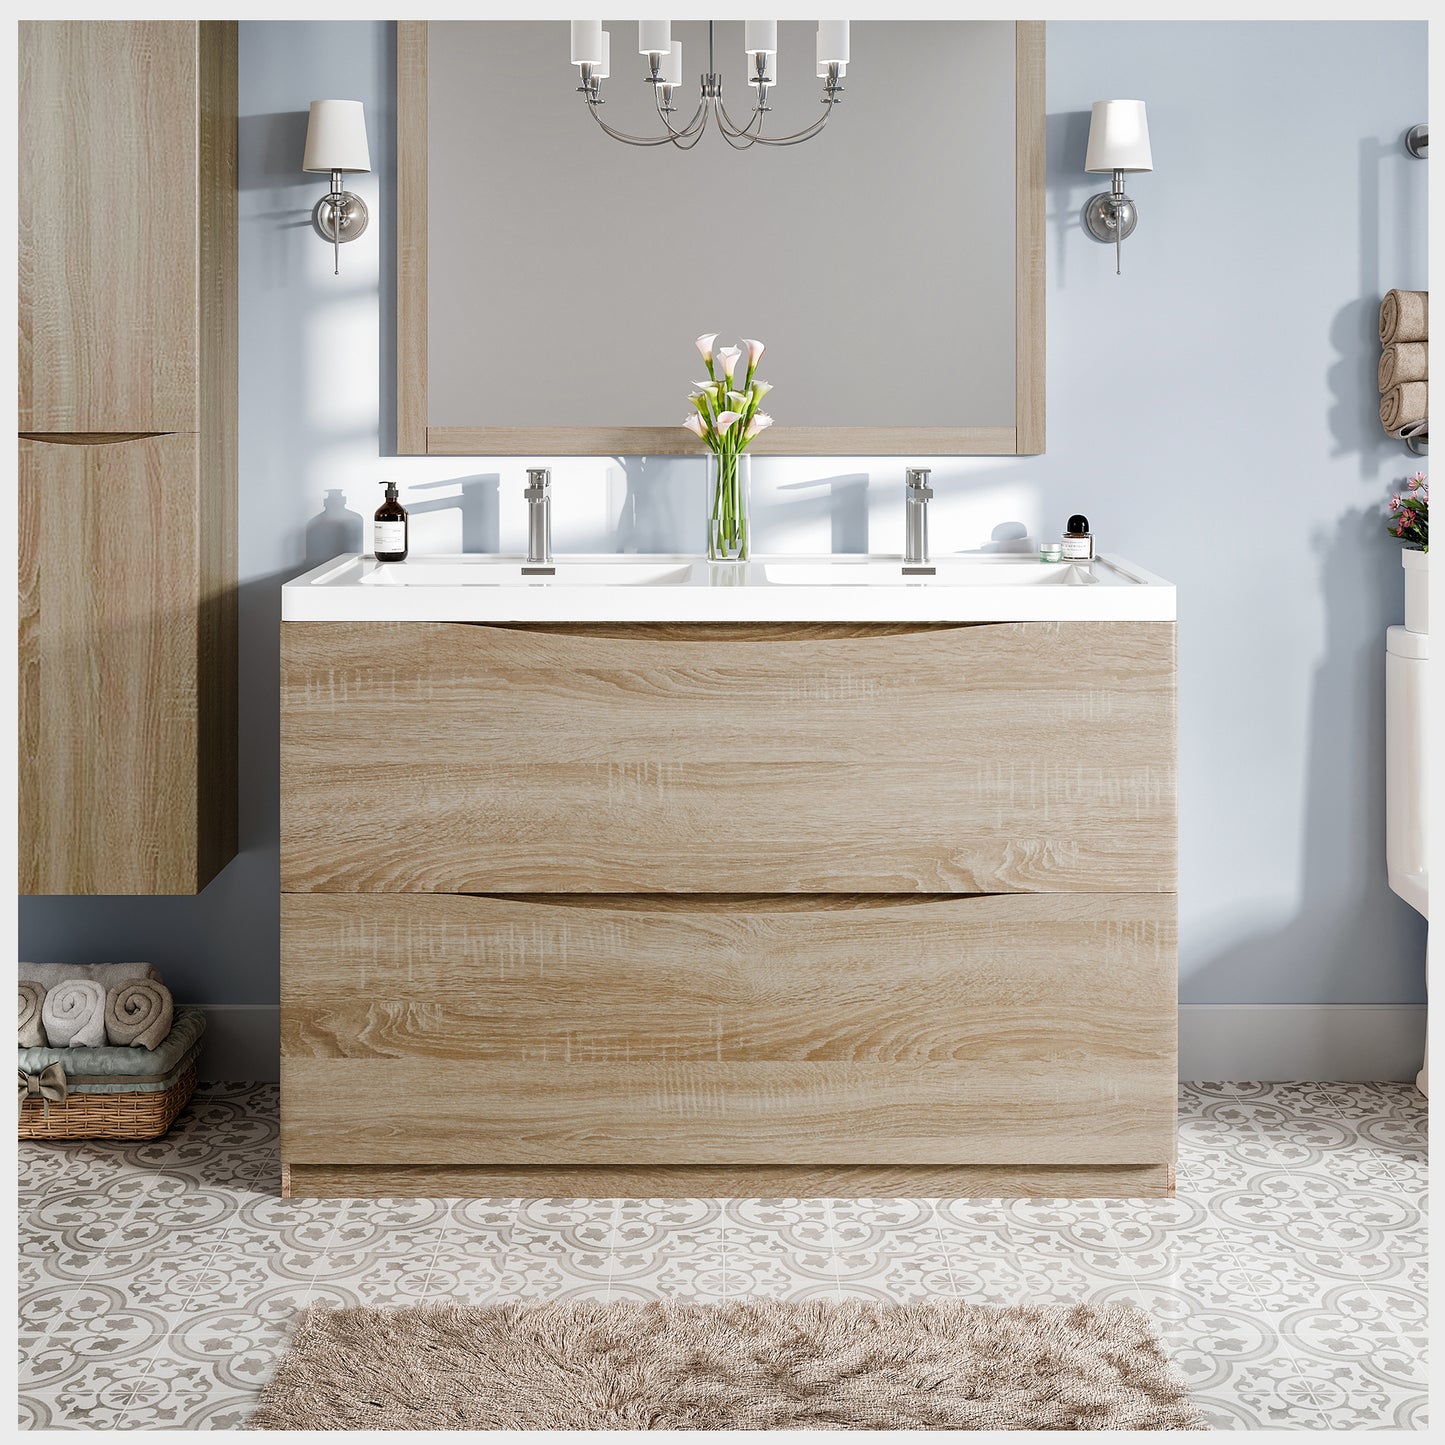 Smile 48"W x 19"D White Oak Double Sink Bathroom Vanity with Acrylic Countertop and Integrated Sink